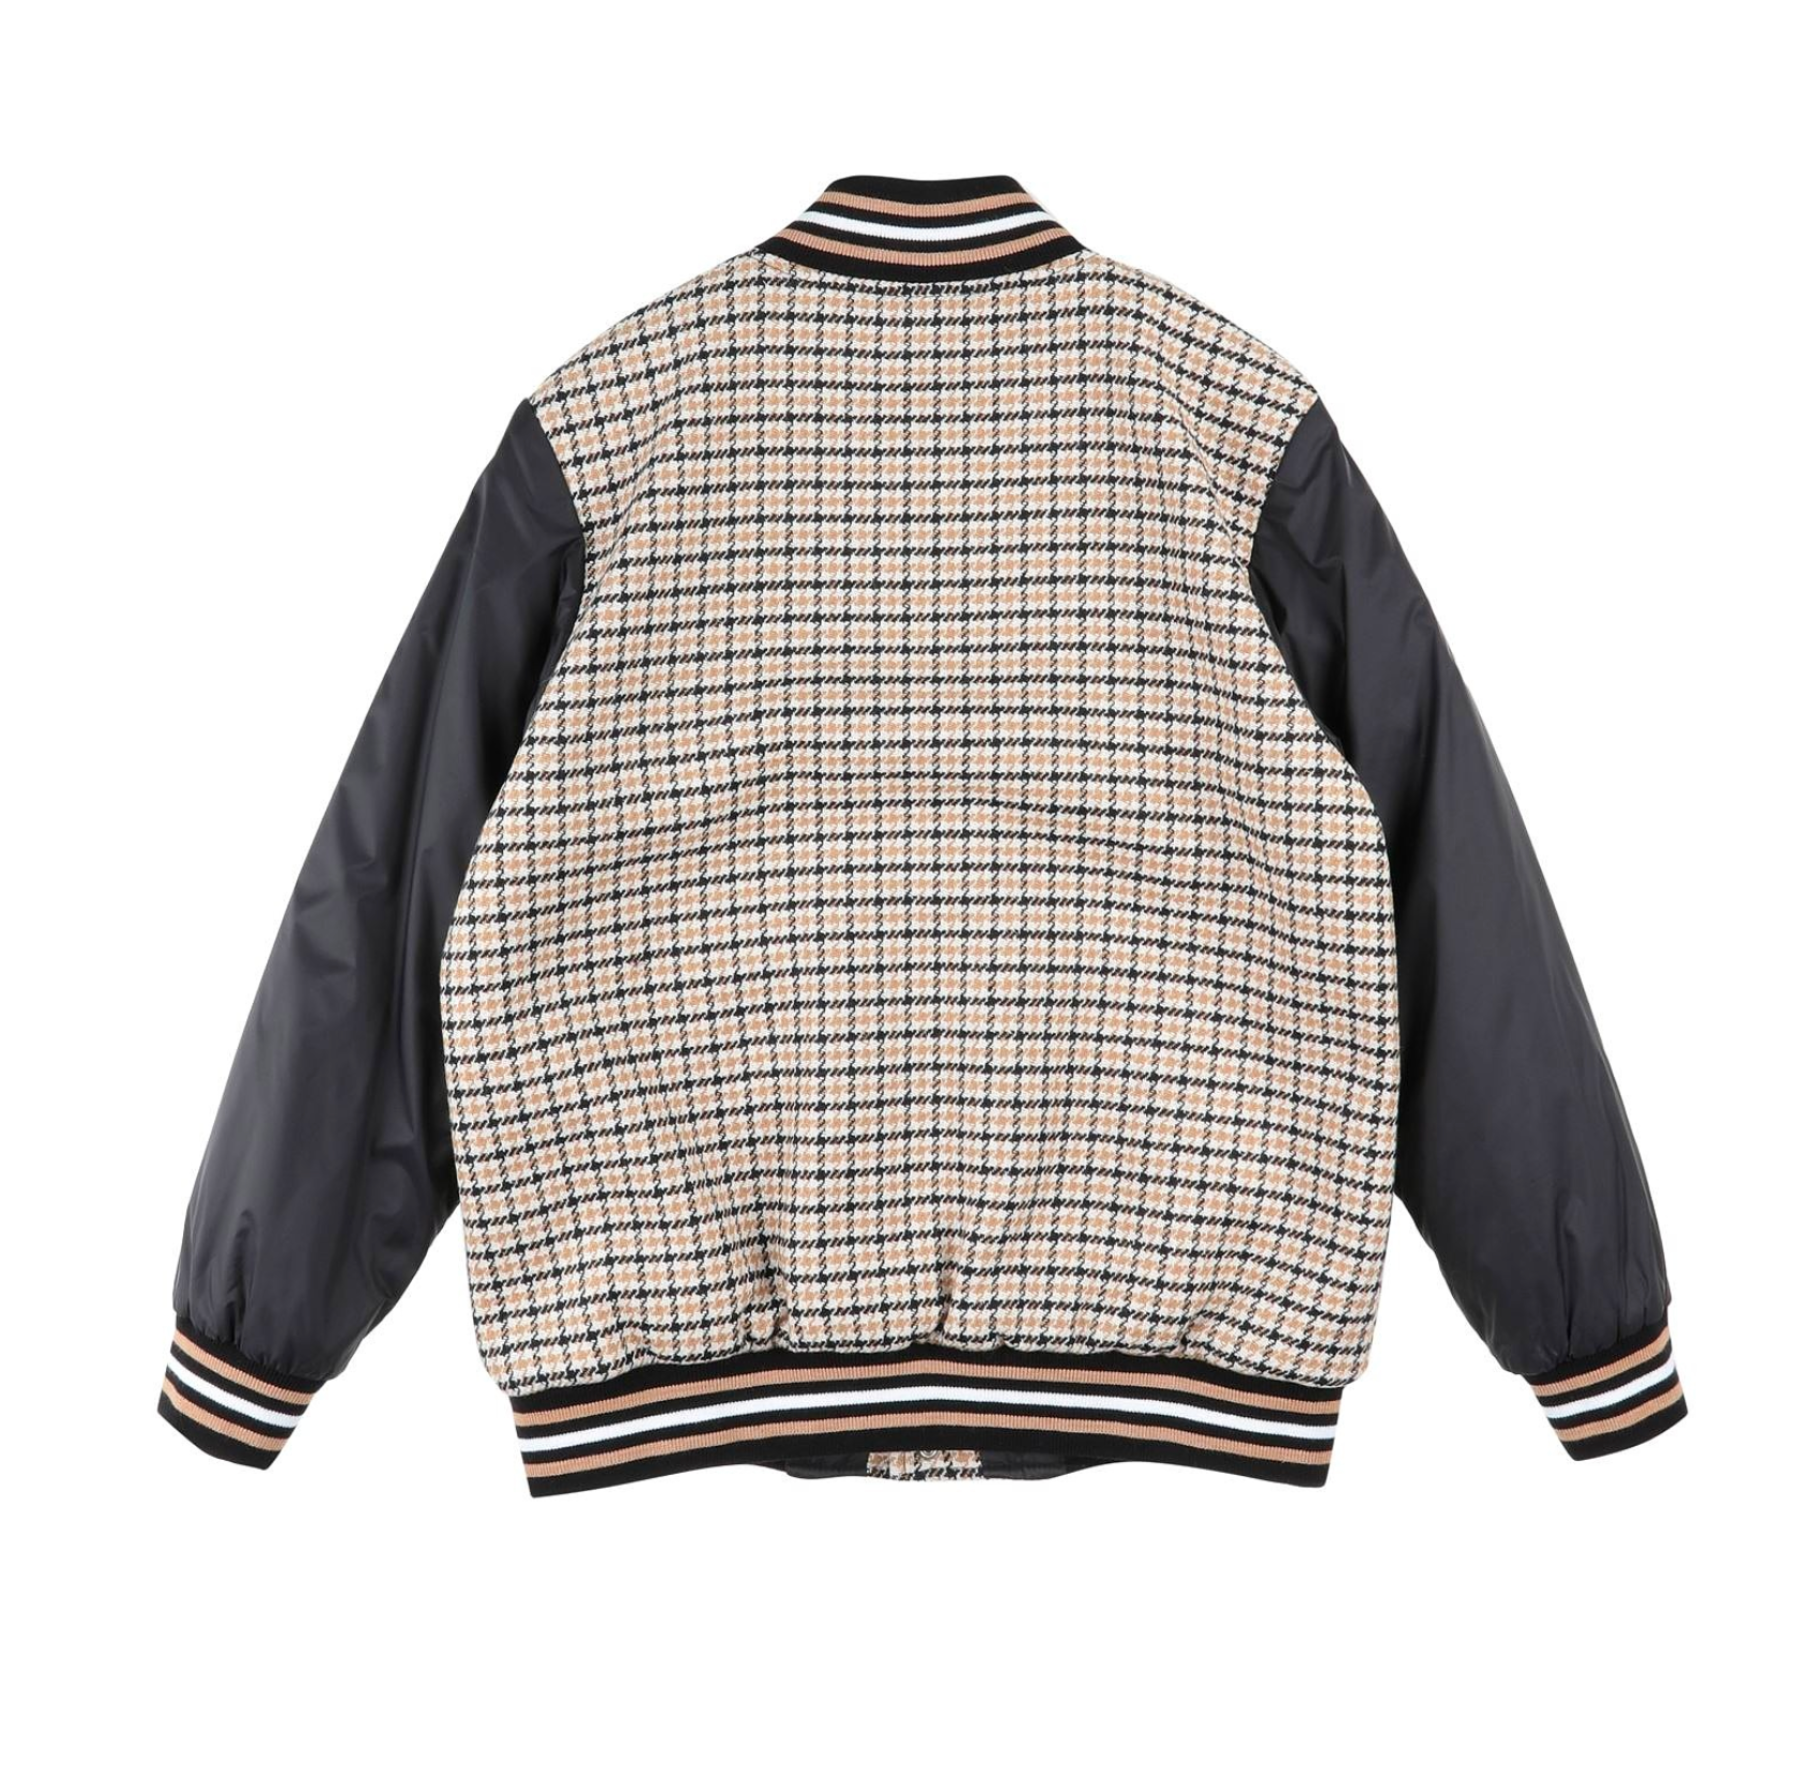 FENDI - Houndstooth jacket with padlock and logo - 8 years old